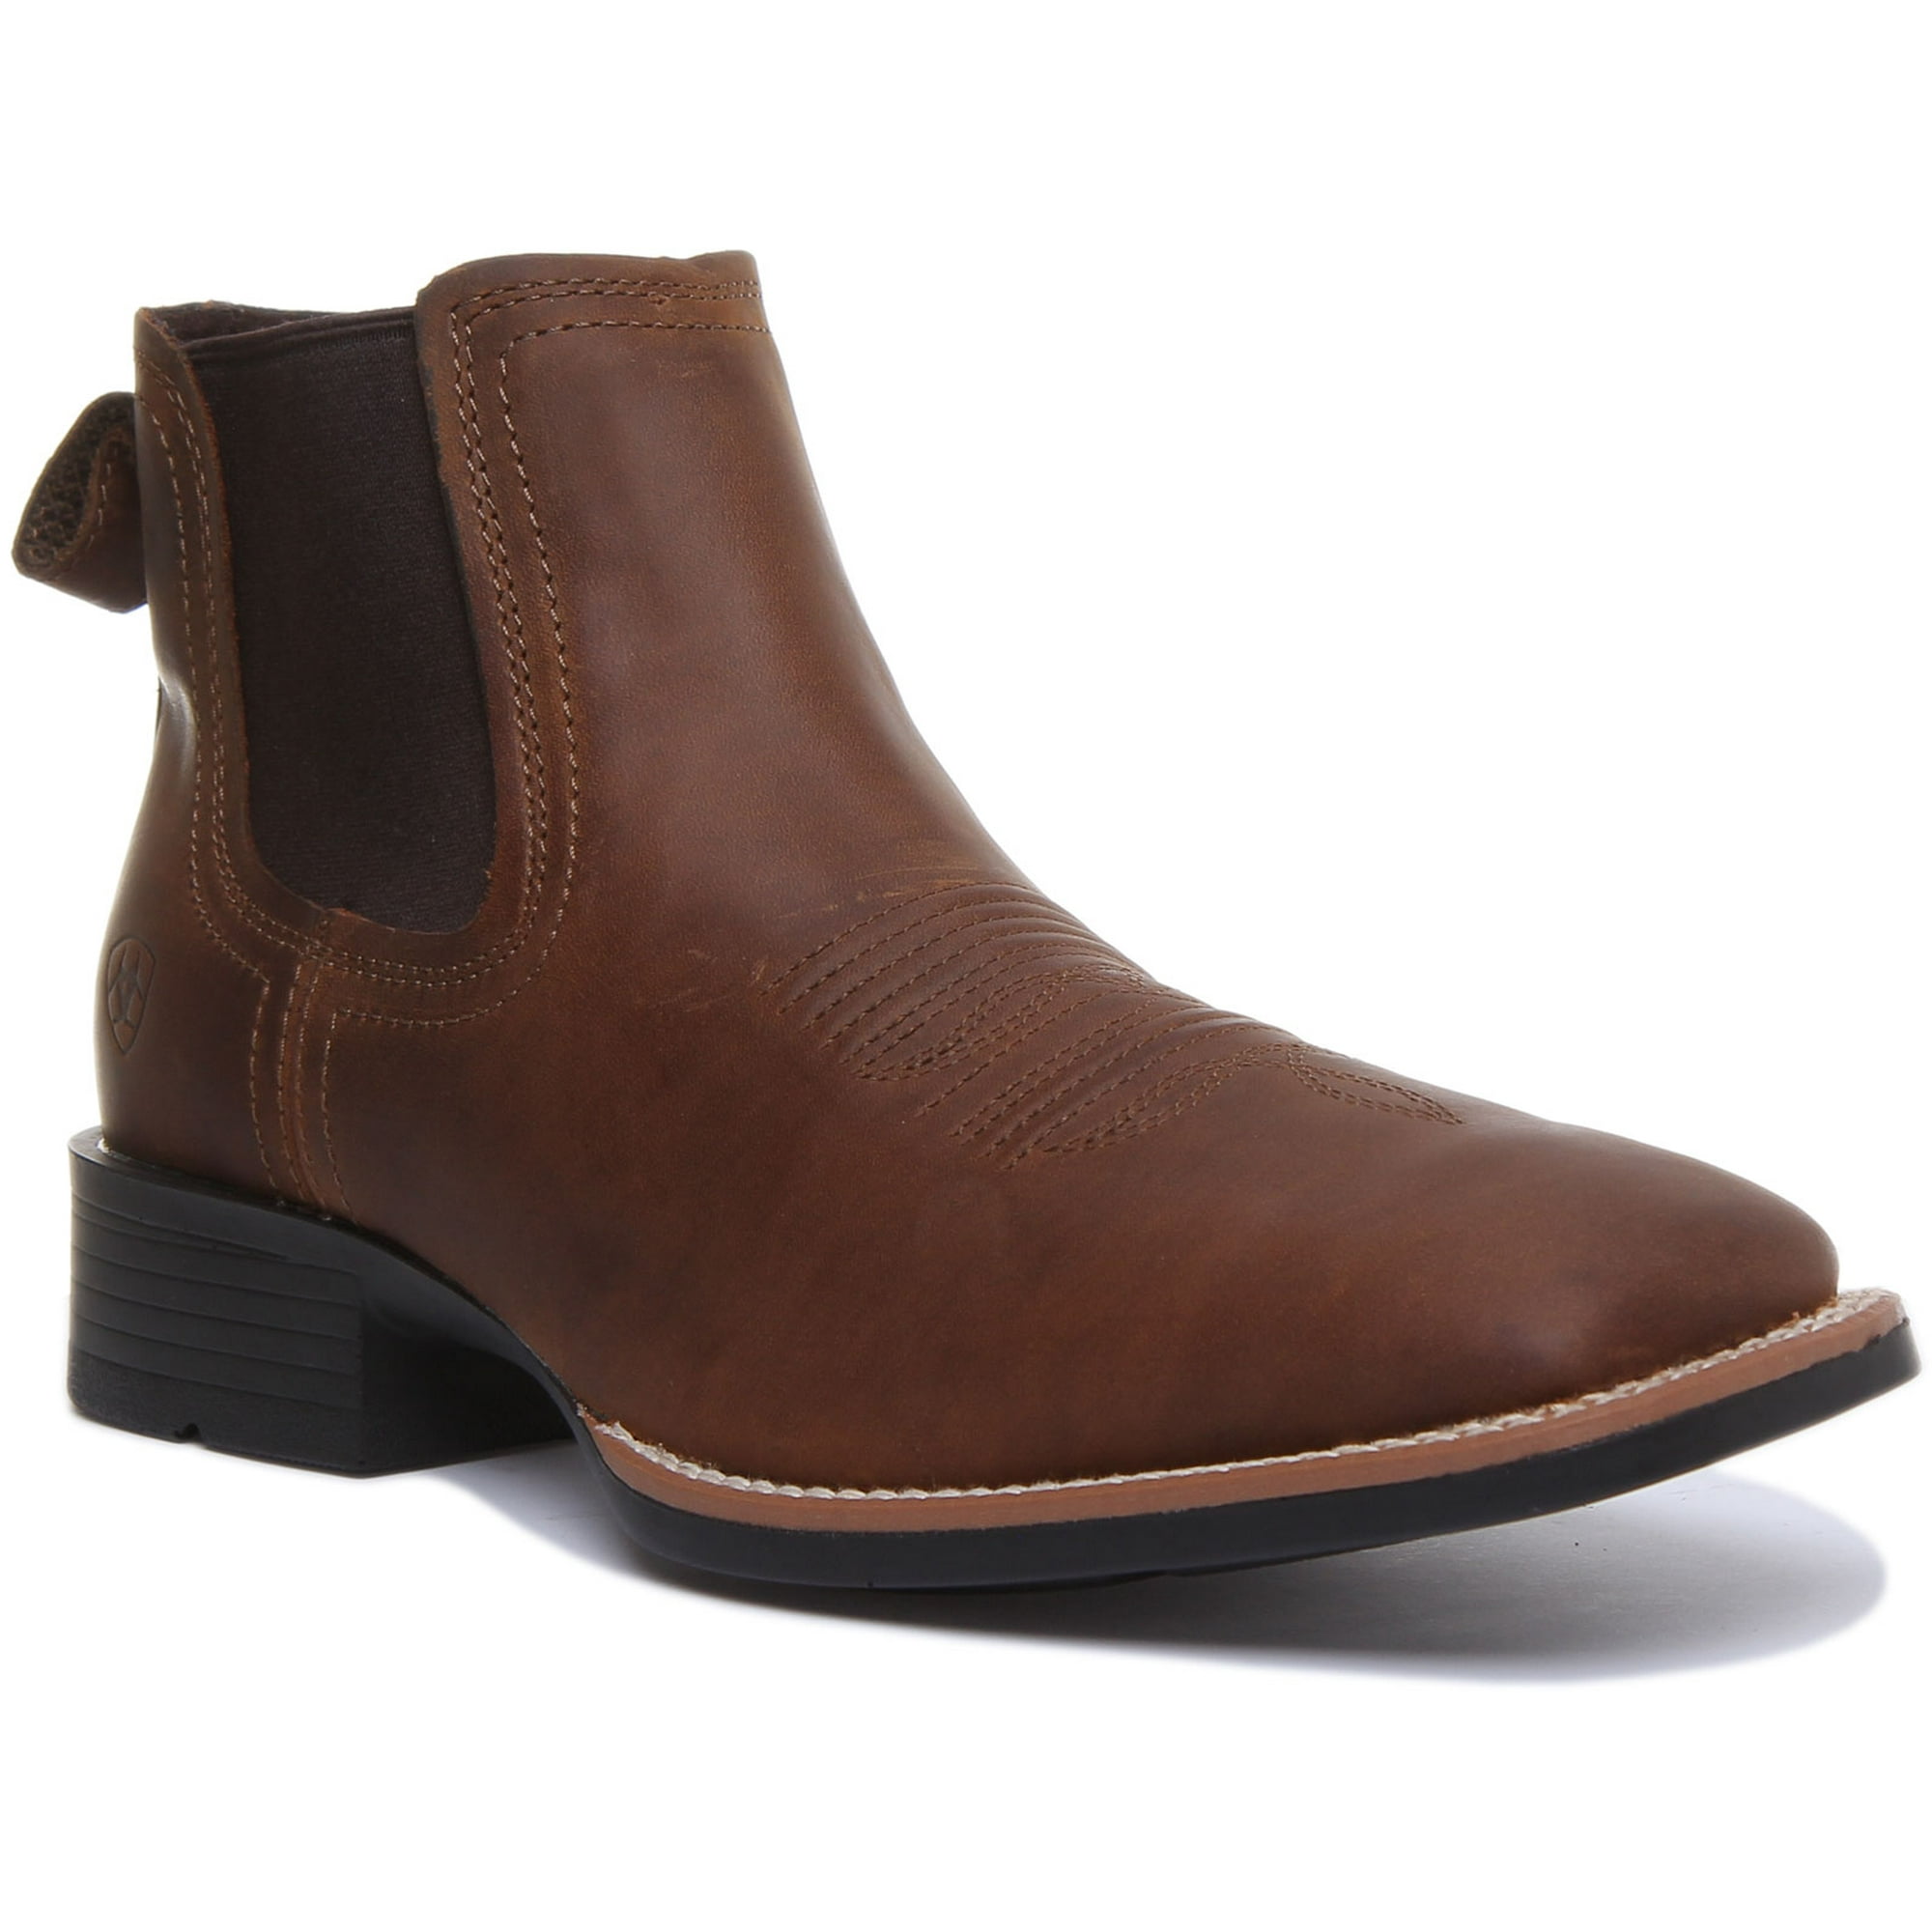 Men's Ariat Booker Ultra Square Toe Ankle Boots - The Boot Store